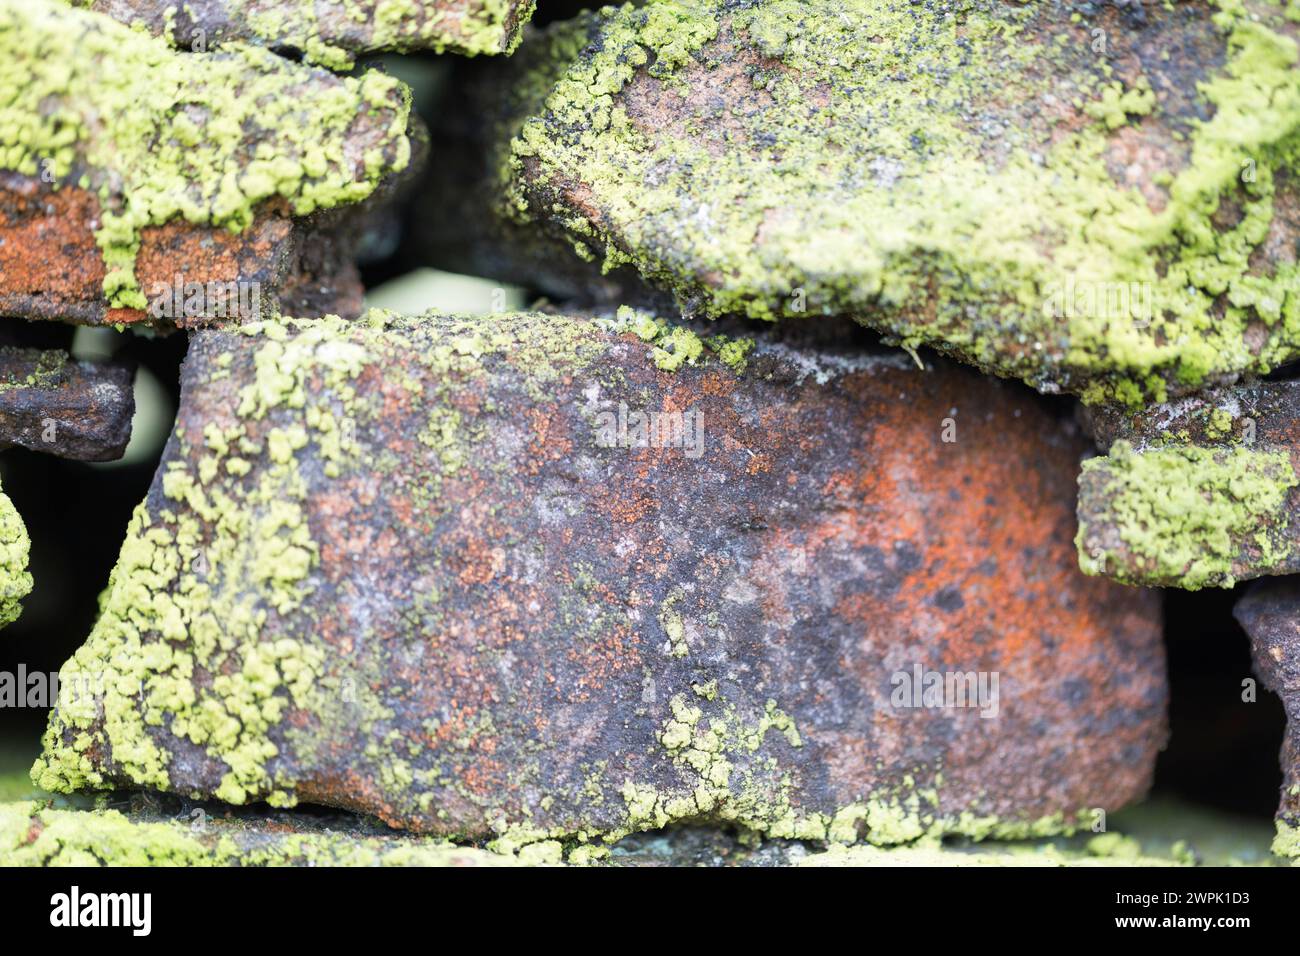 UK, Derbyshire, Dovedale, moss covered dry stone wall. Stock Photo